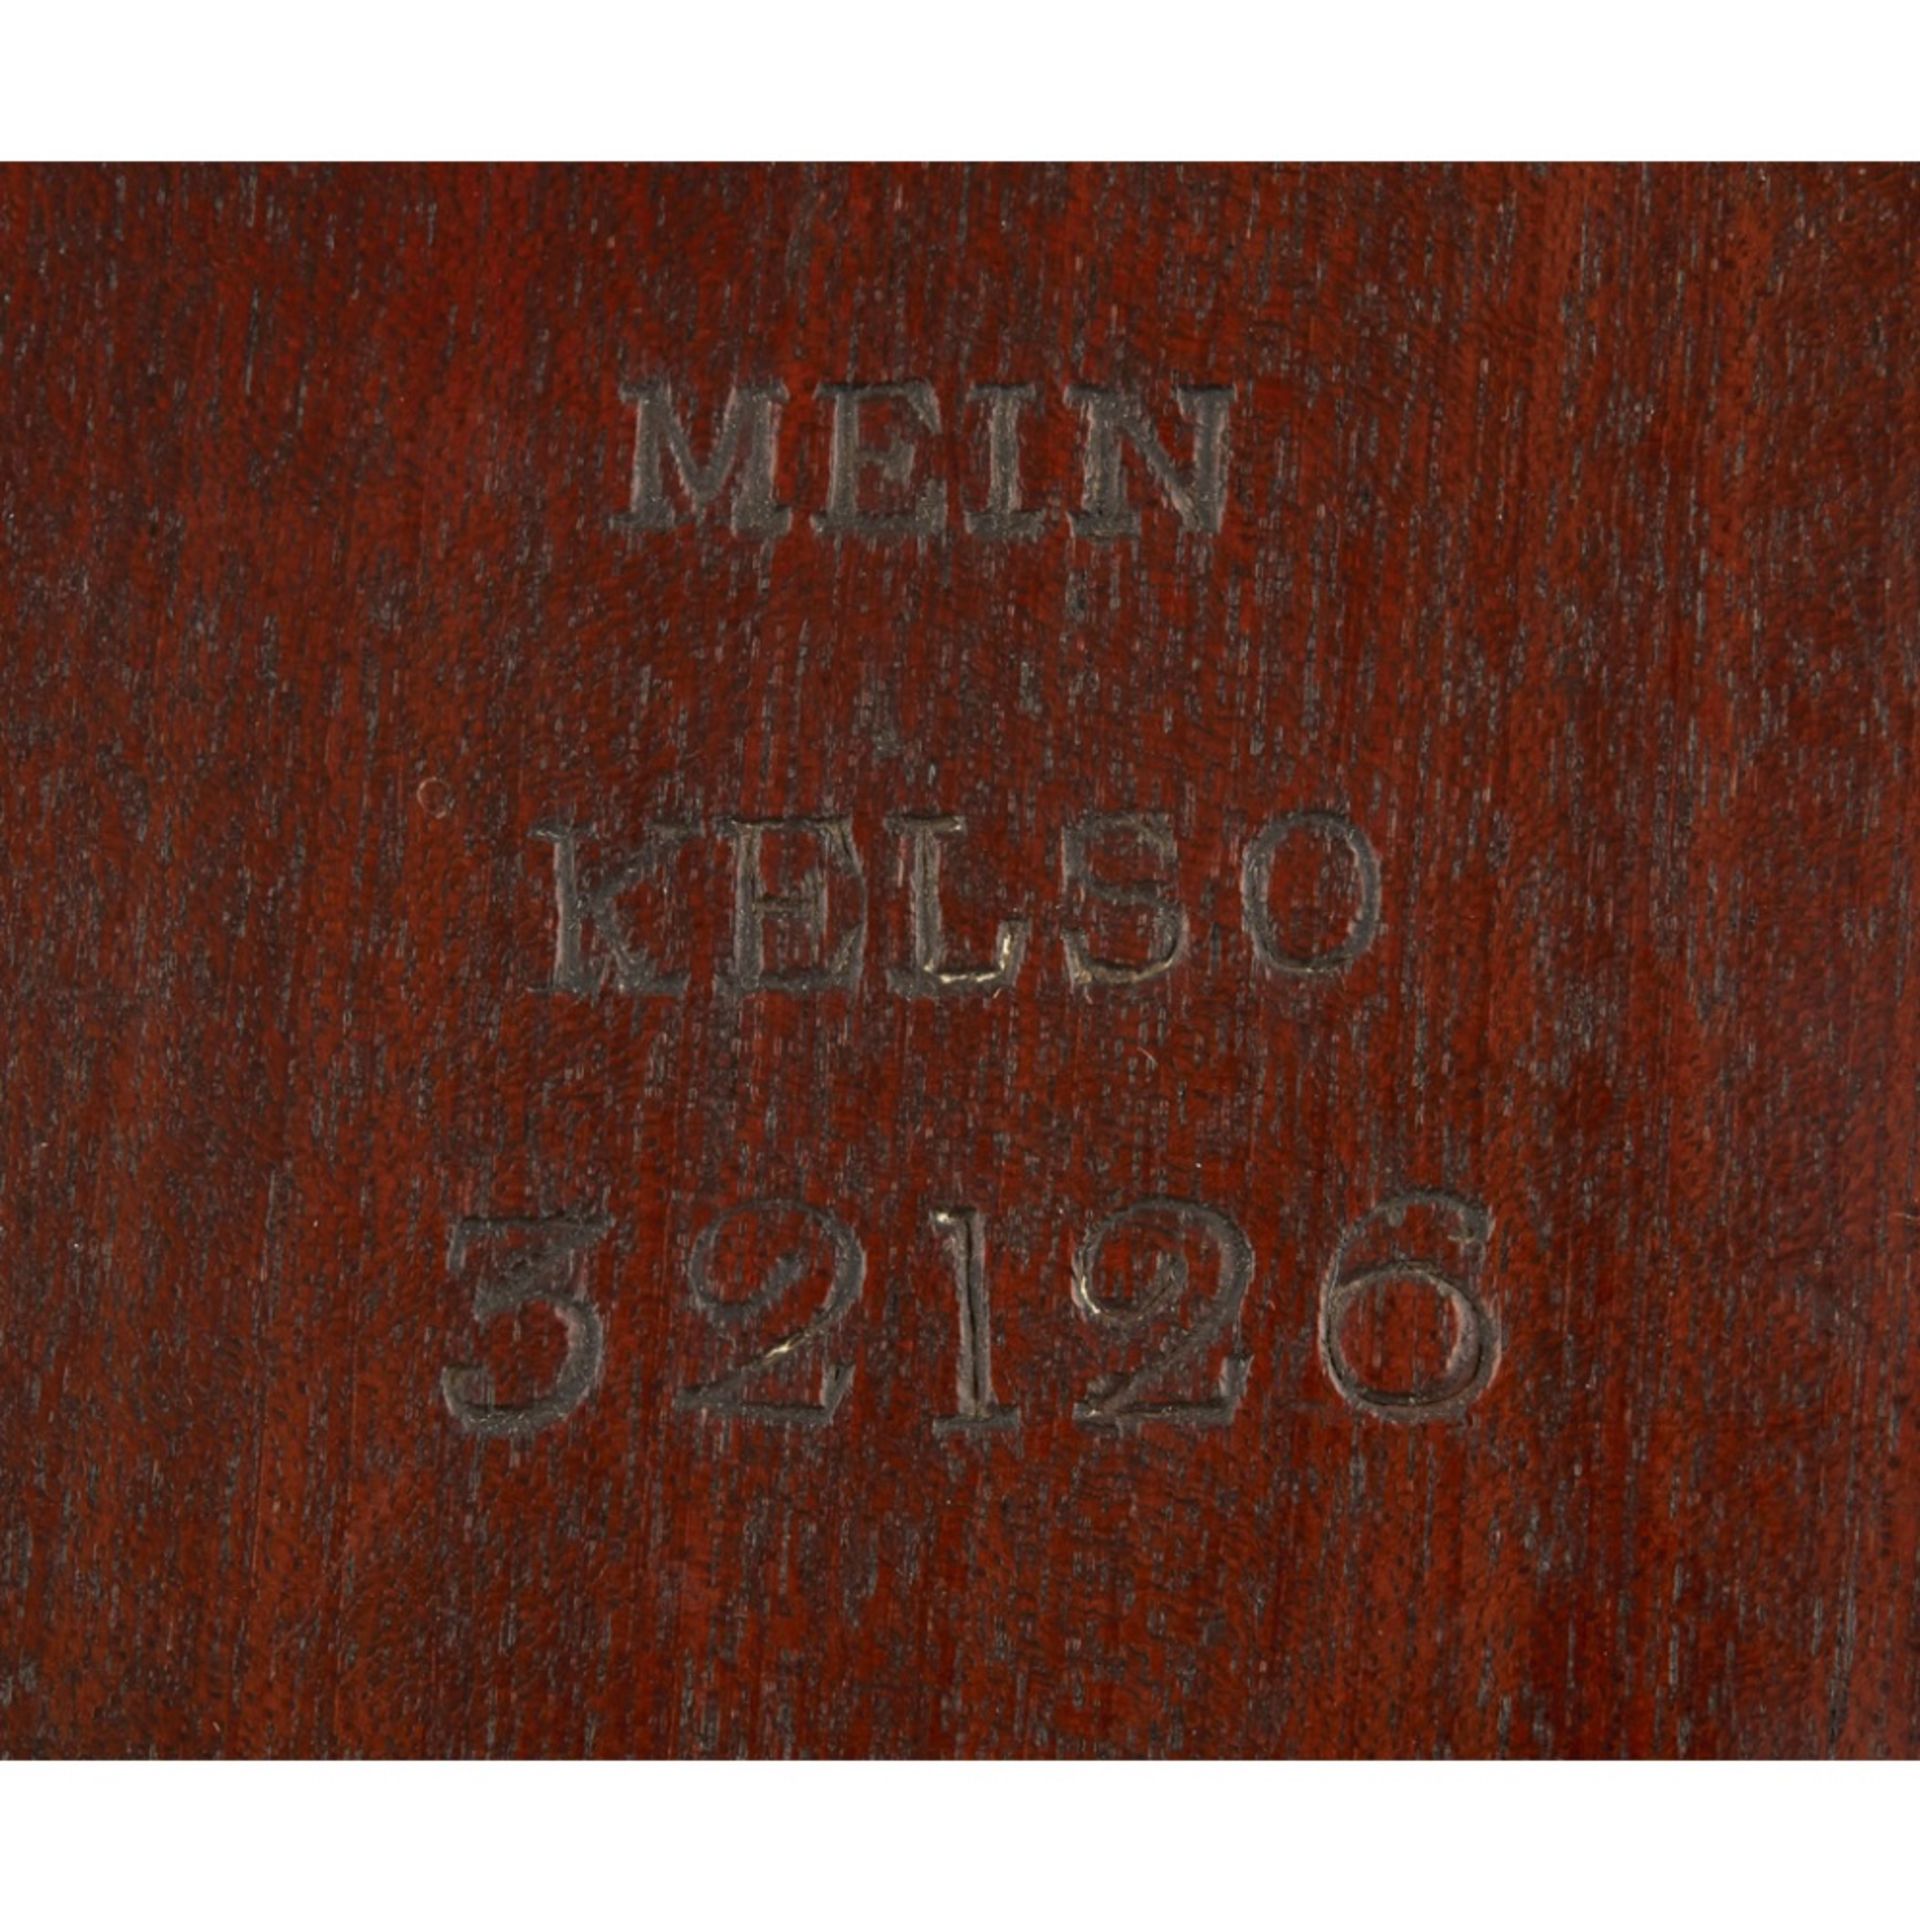 A SCOTTISH REGENCY MAHOGANY WINE COASTER BY JAMES MEIN, KELSO CIRCA 1830 the turned and moulded - Image 4 of 4